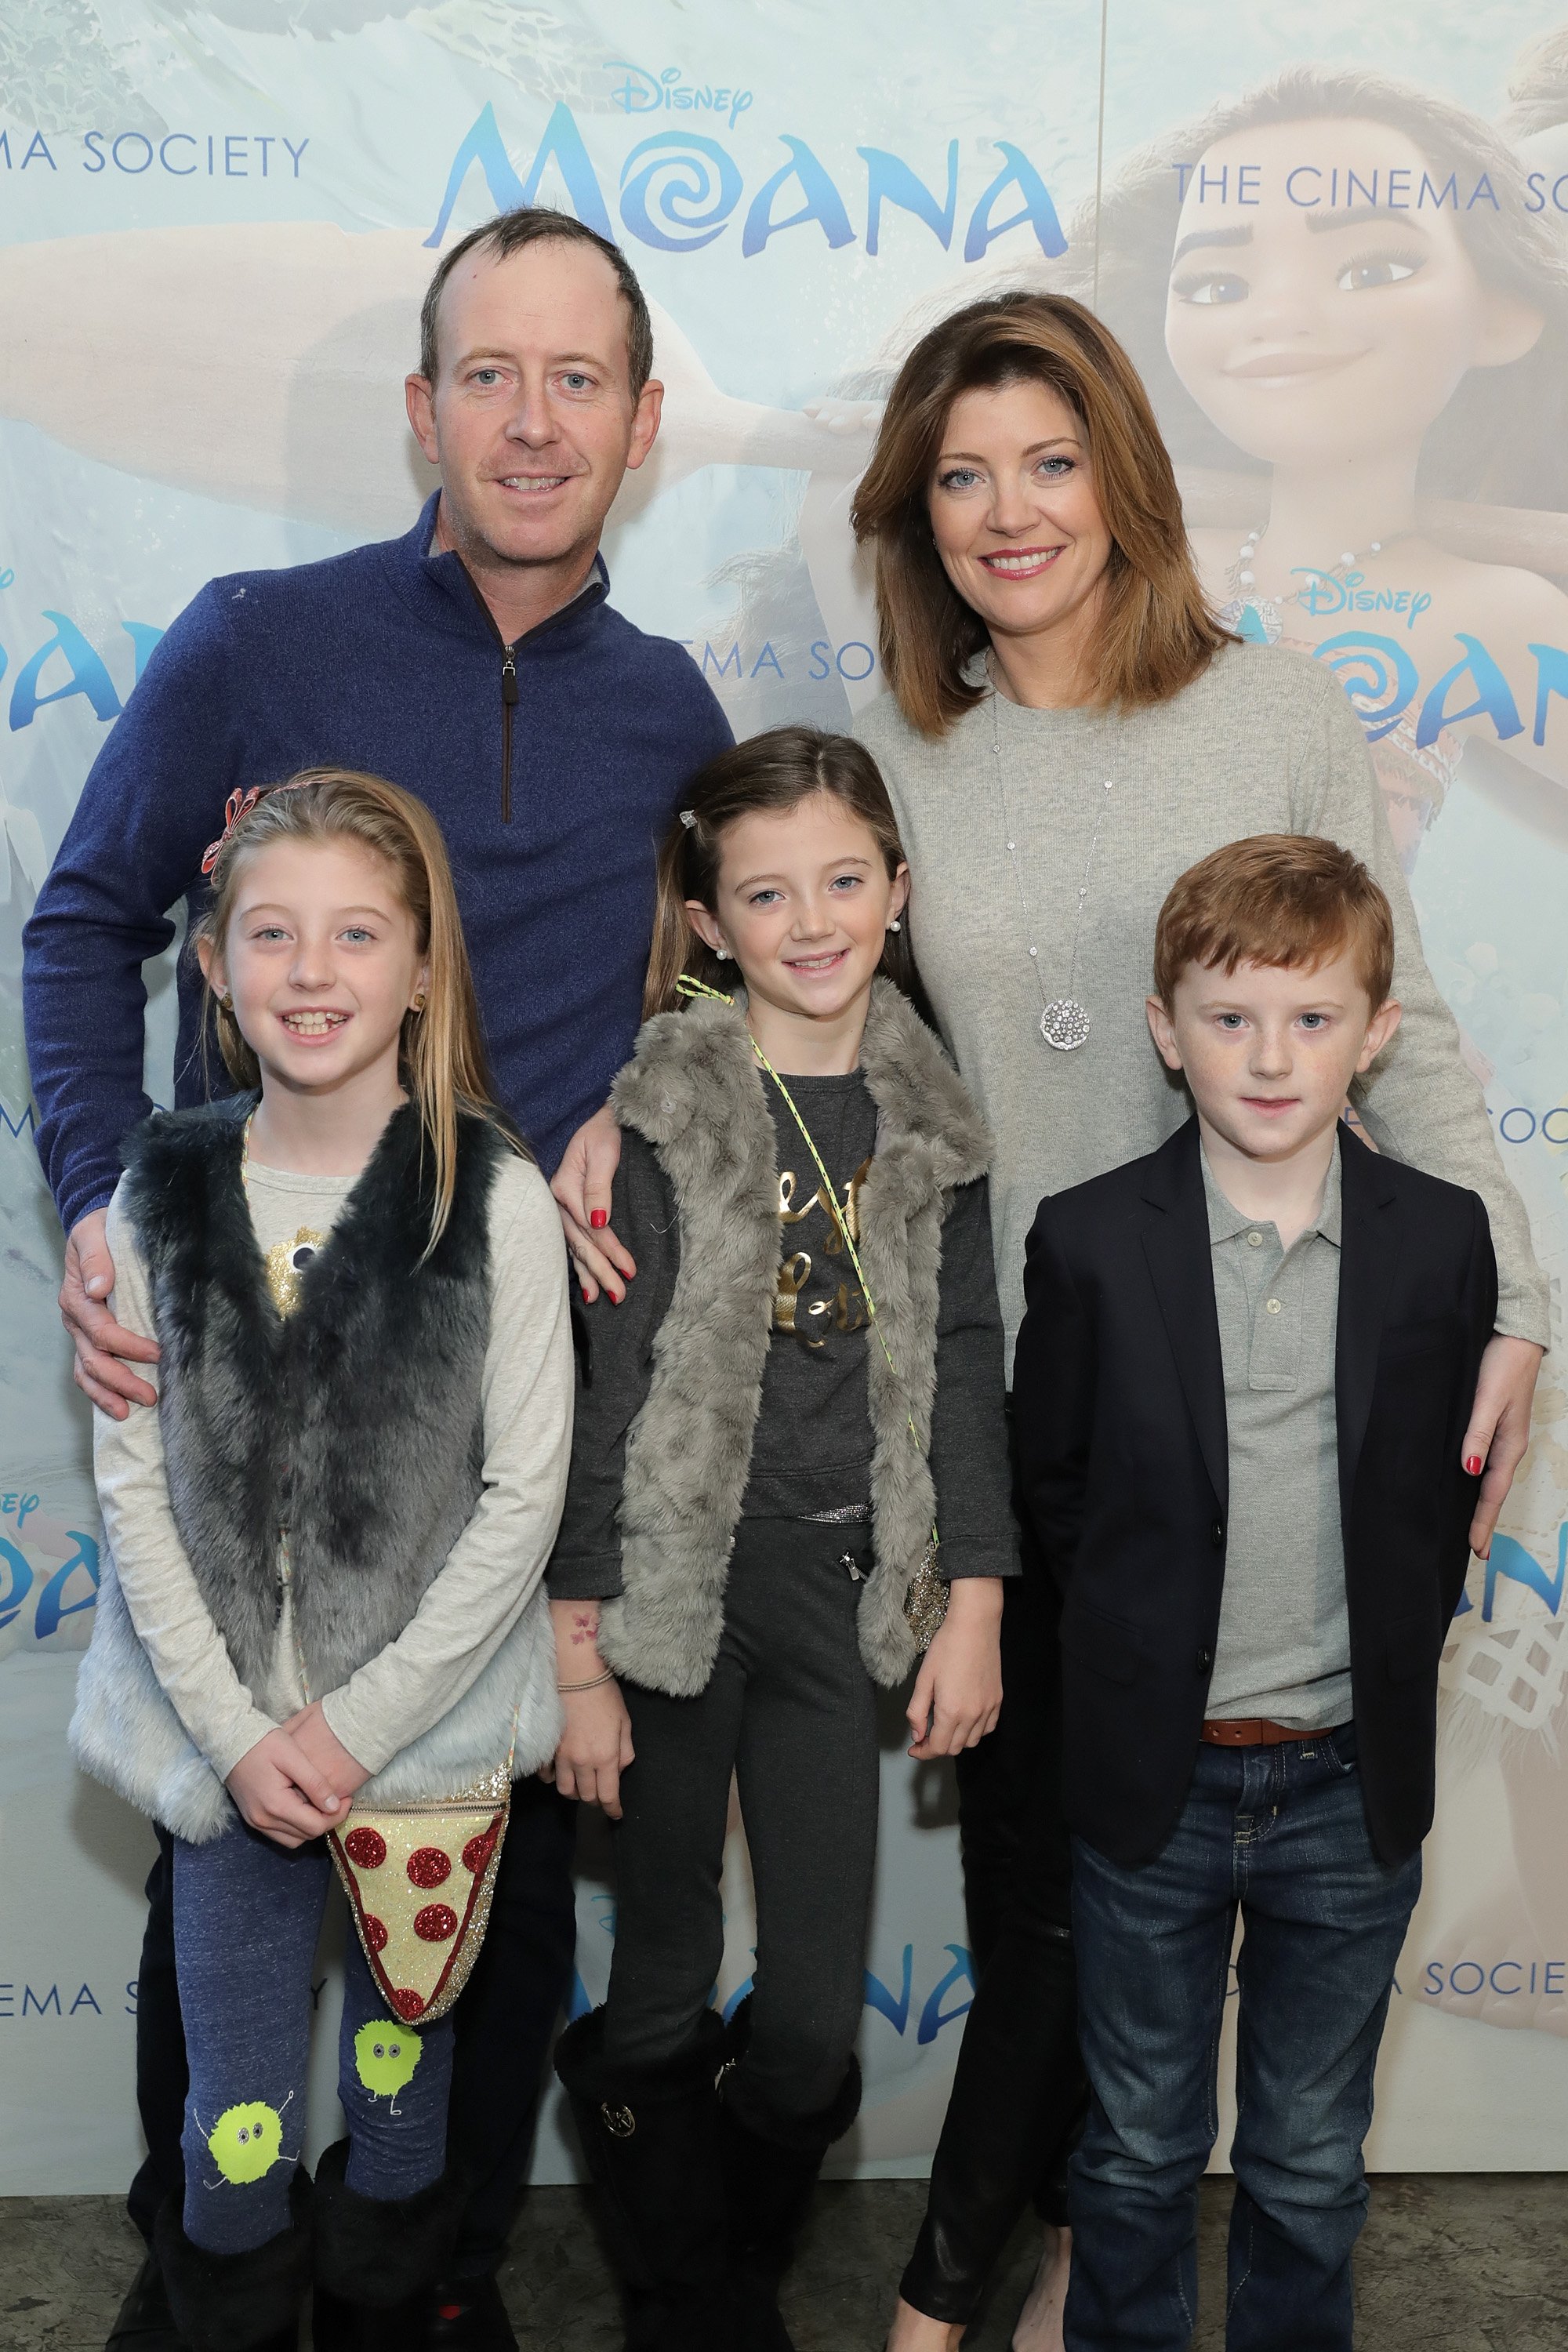 Norah O'Donnell, Geoff Tracy, Riley Norah Tracy, Grace Tracy and Henry Tracy attend the Cinema Society Screening of Disney's "Moana" at Metrograph on November 20, 2016 in New York City. | Source: Getty Images